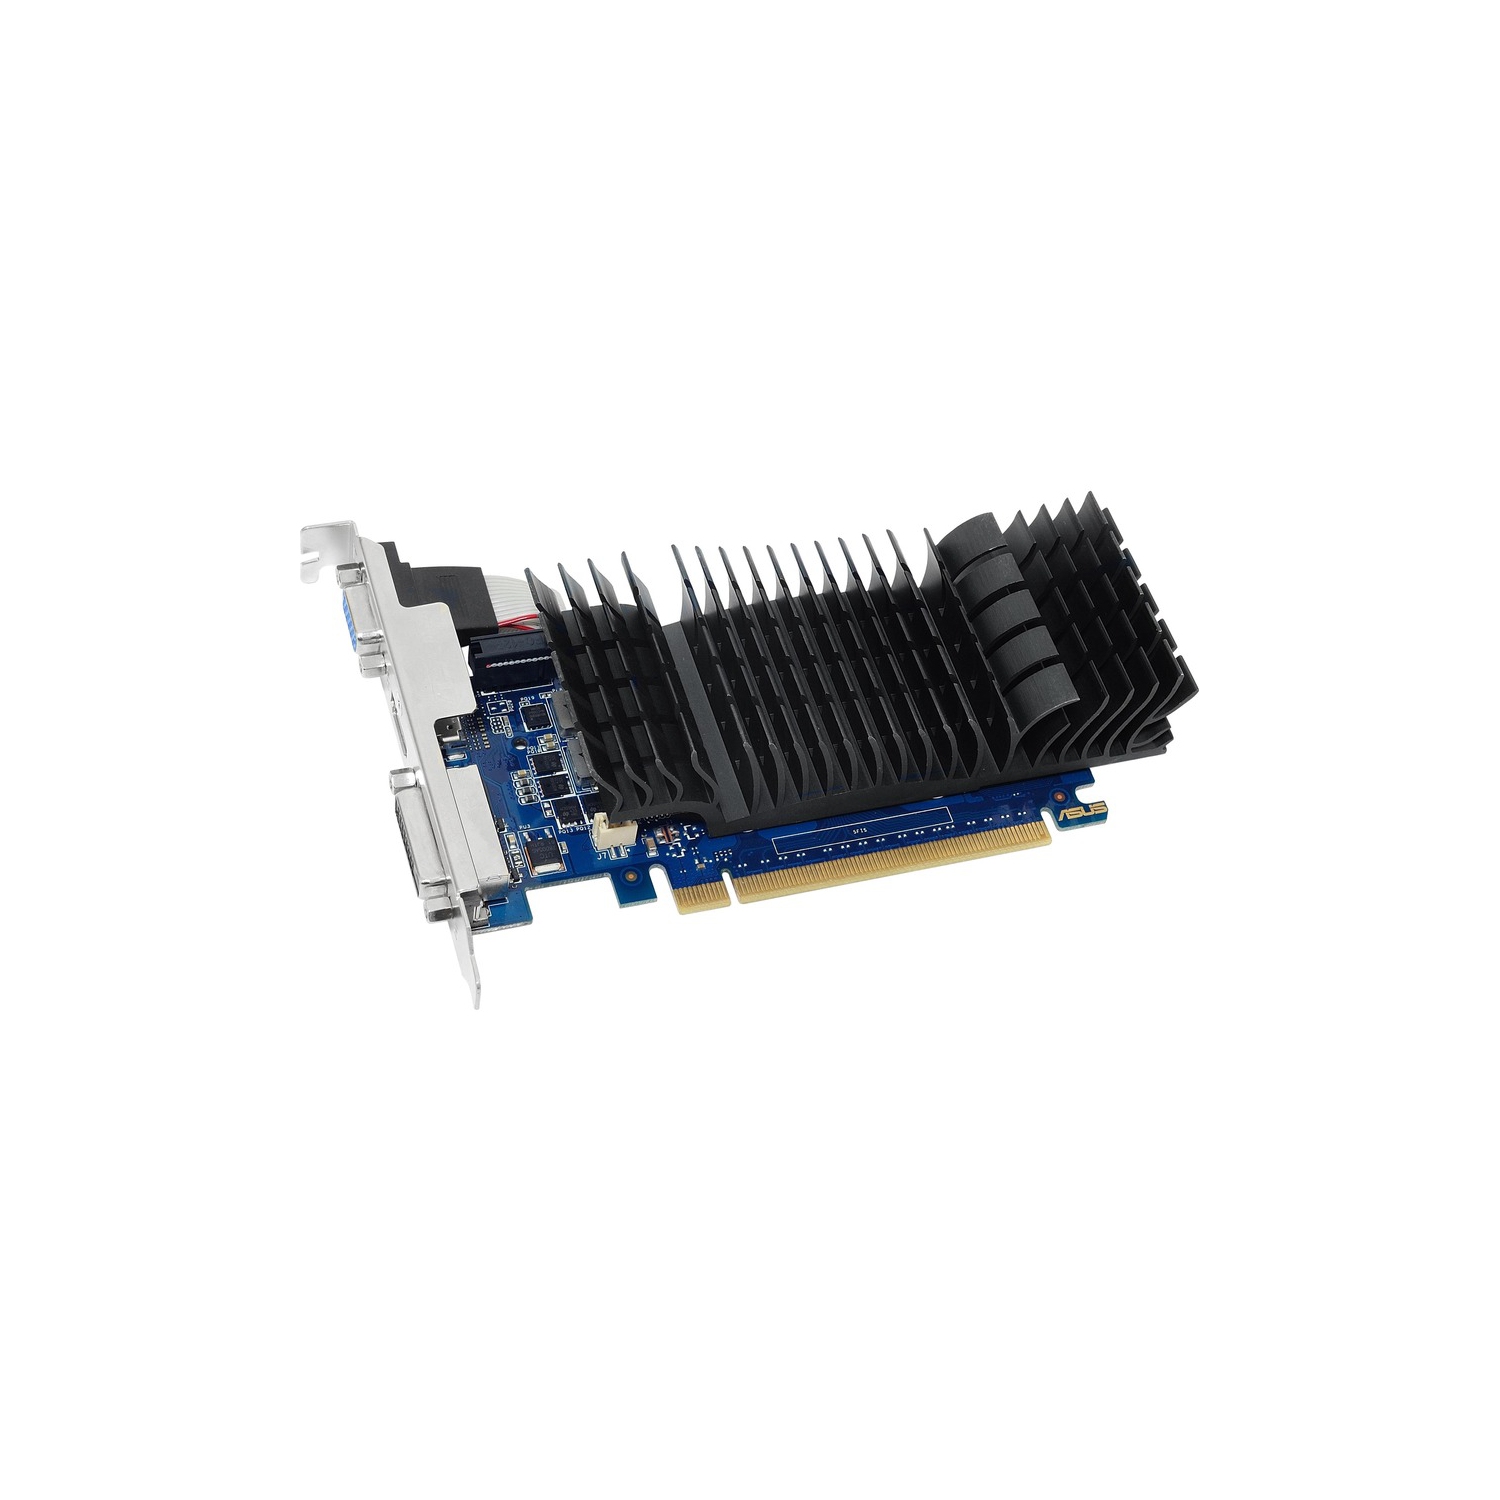 Asus NVIDIA GeForce GT 730 Graphic Card 2 GB